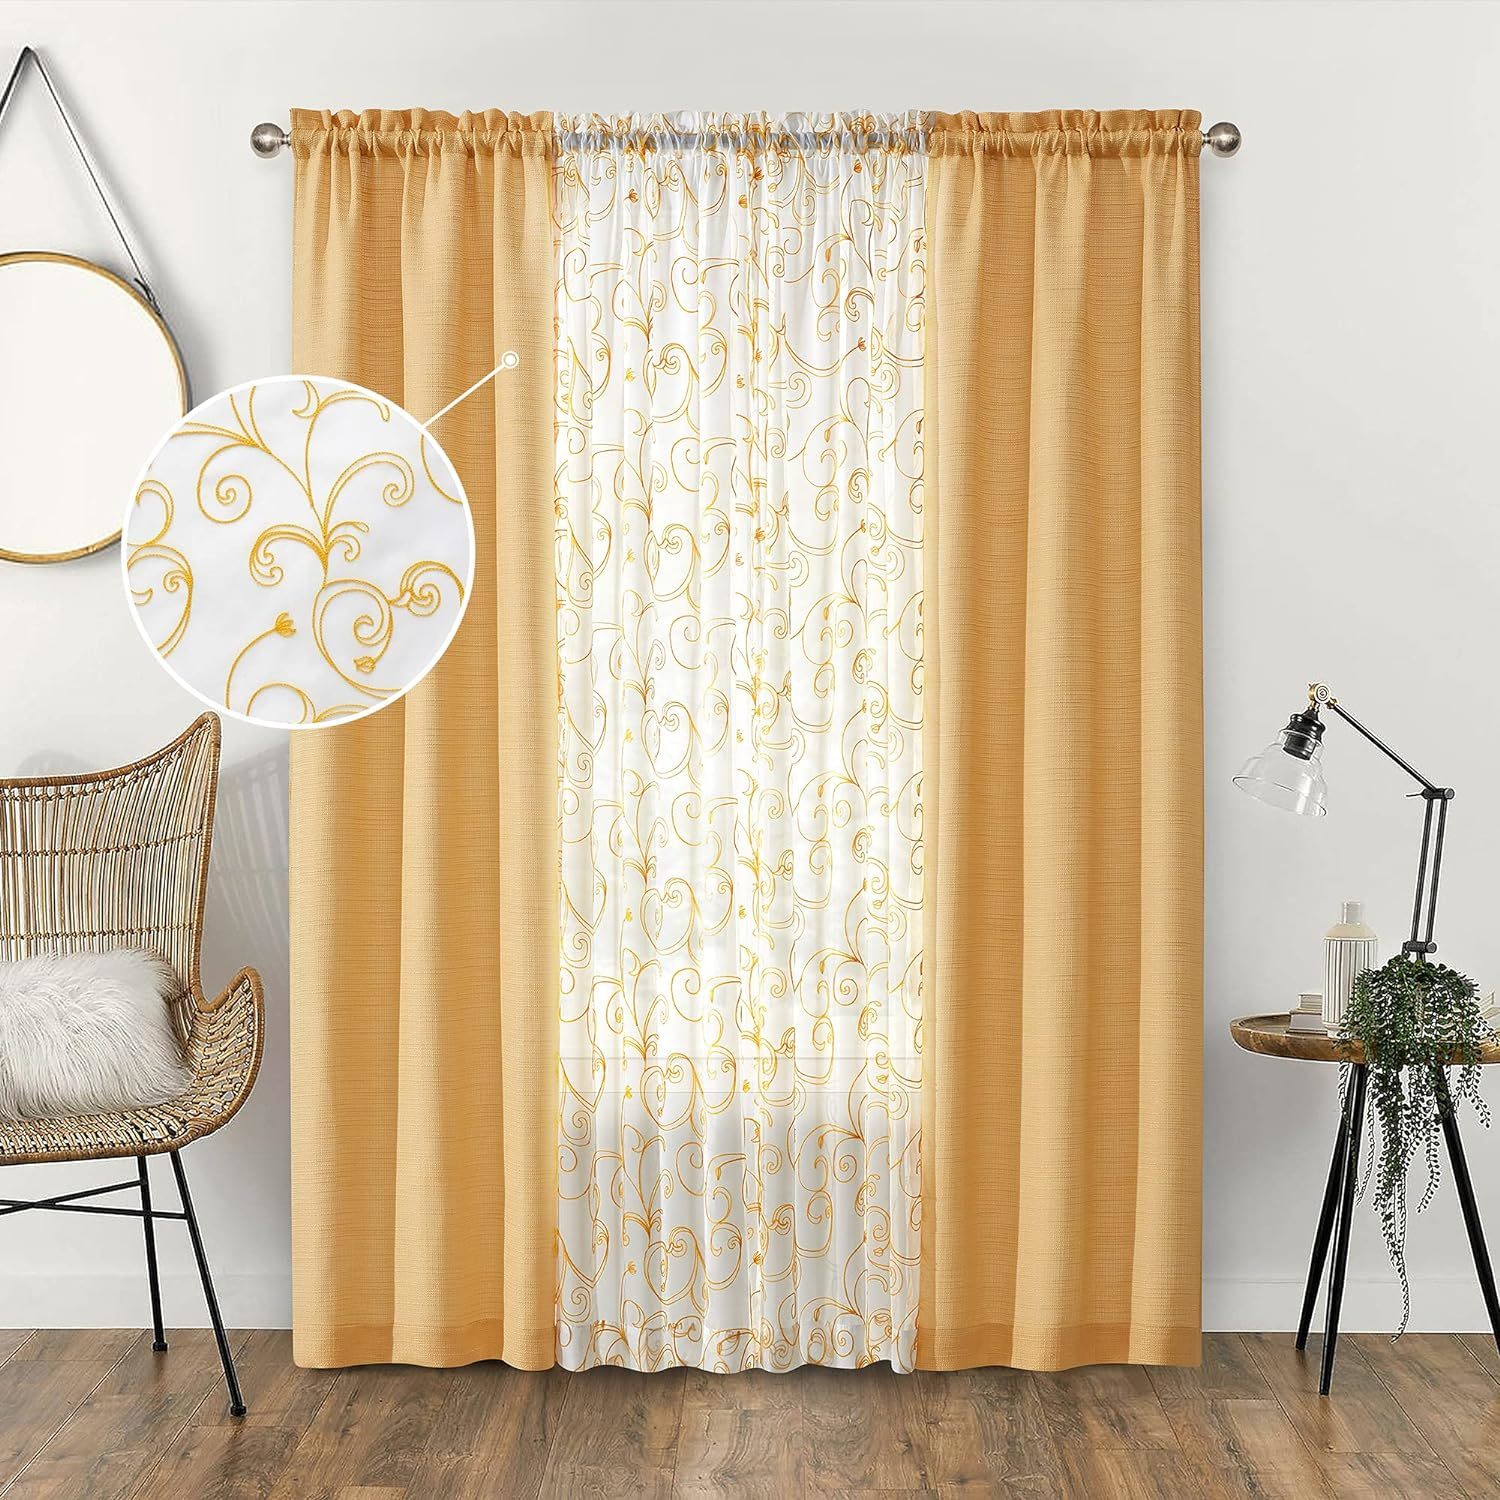 Aufenlly 4 Pc. Curtain Set Living Room Curtains 108 Inches Long (2 Embroidery - $46.92